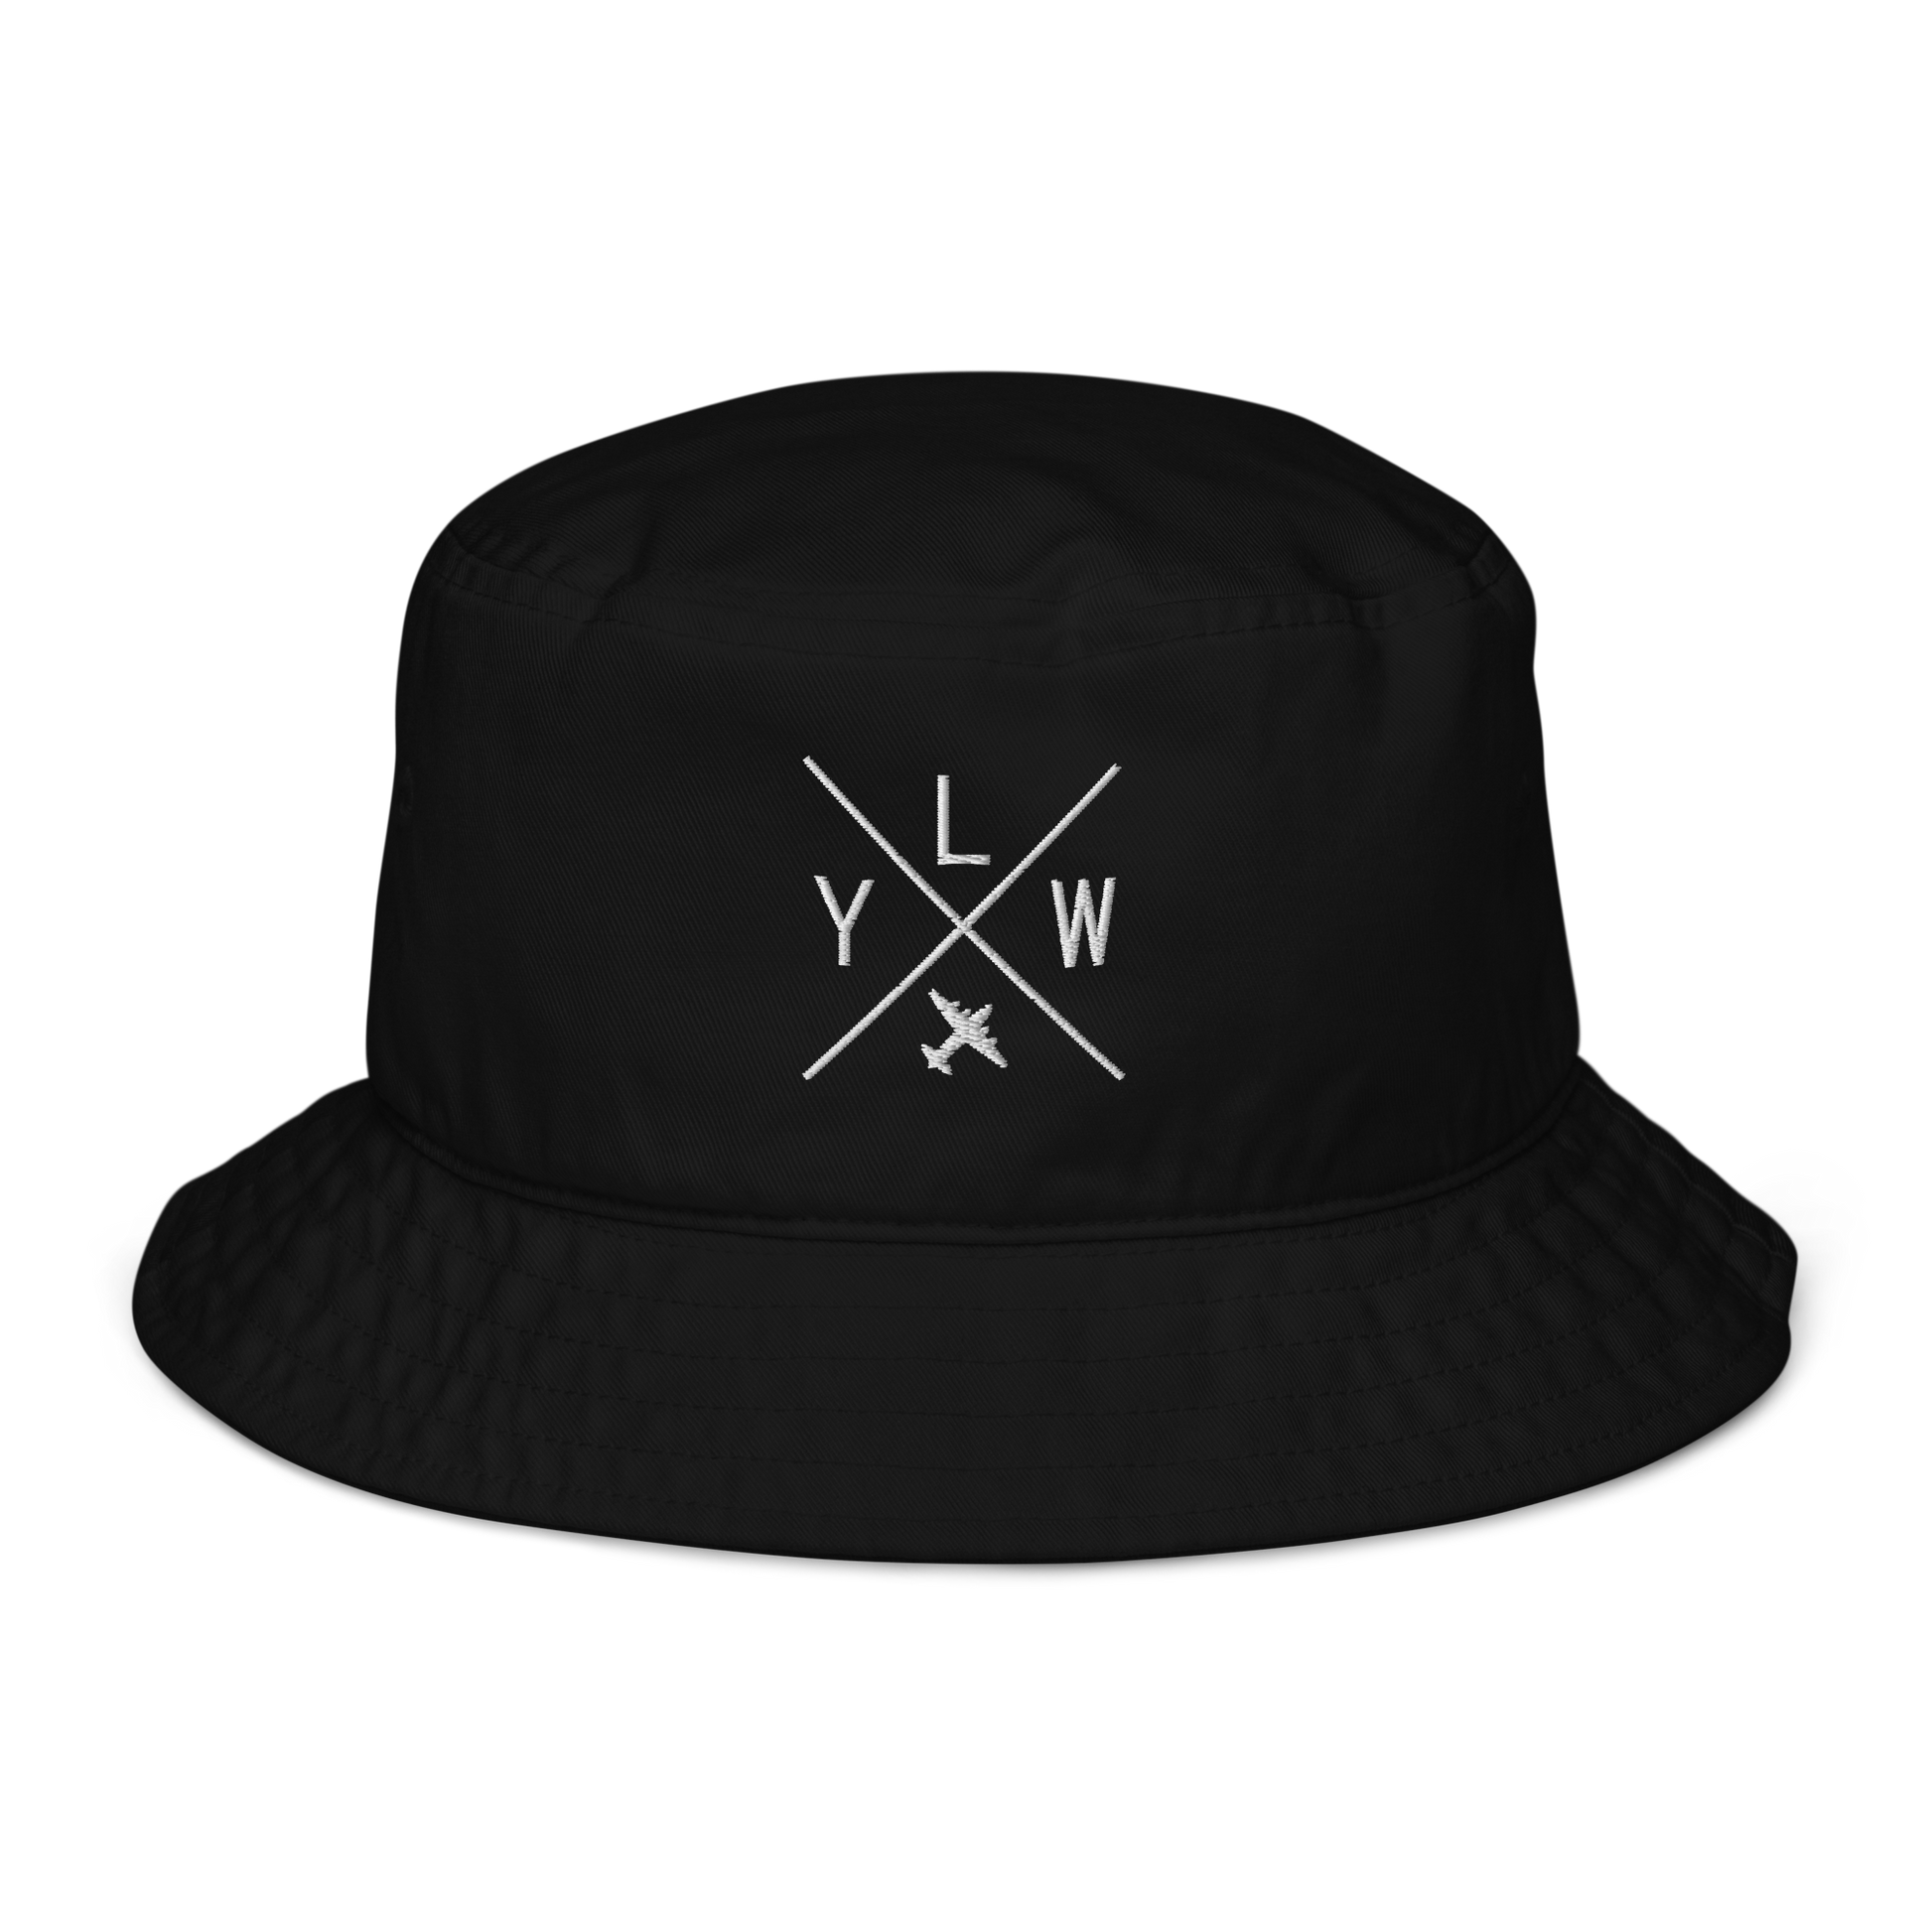 YHM Designs - YLW Kelowna Organic Cotton Bucket Hat - Crossed-X Design with Airport Code and Vintage Propliner - White Embroidery - Image 01